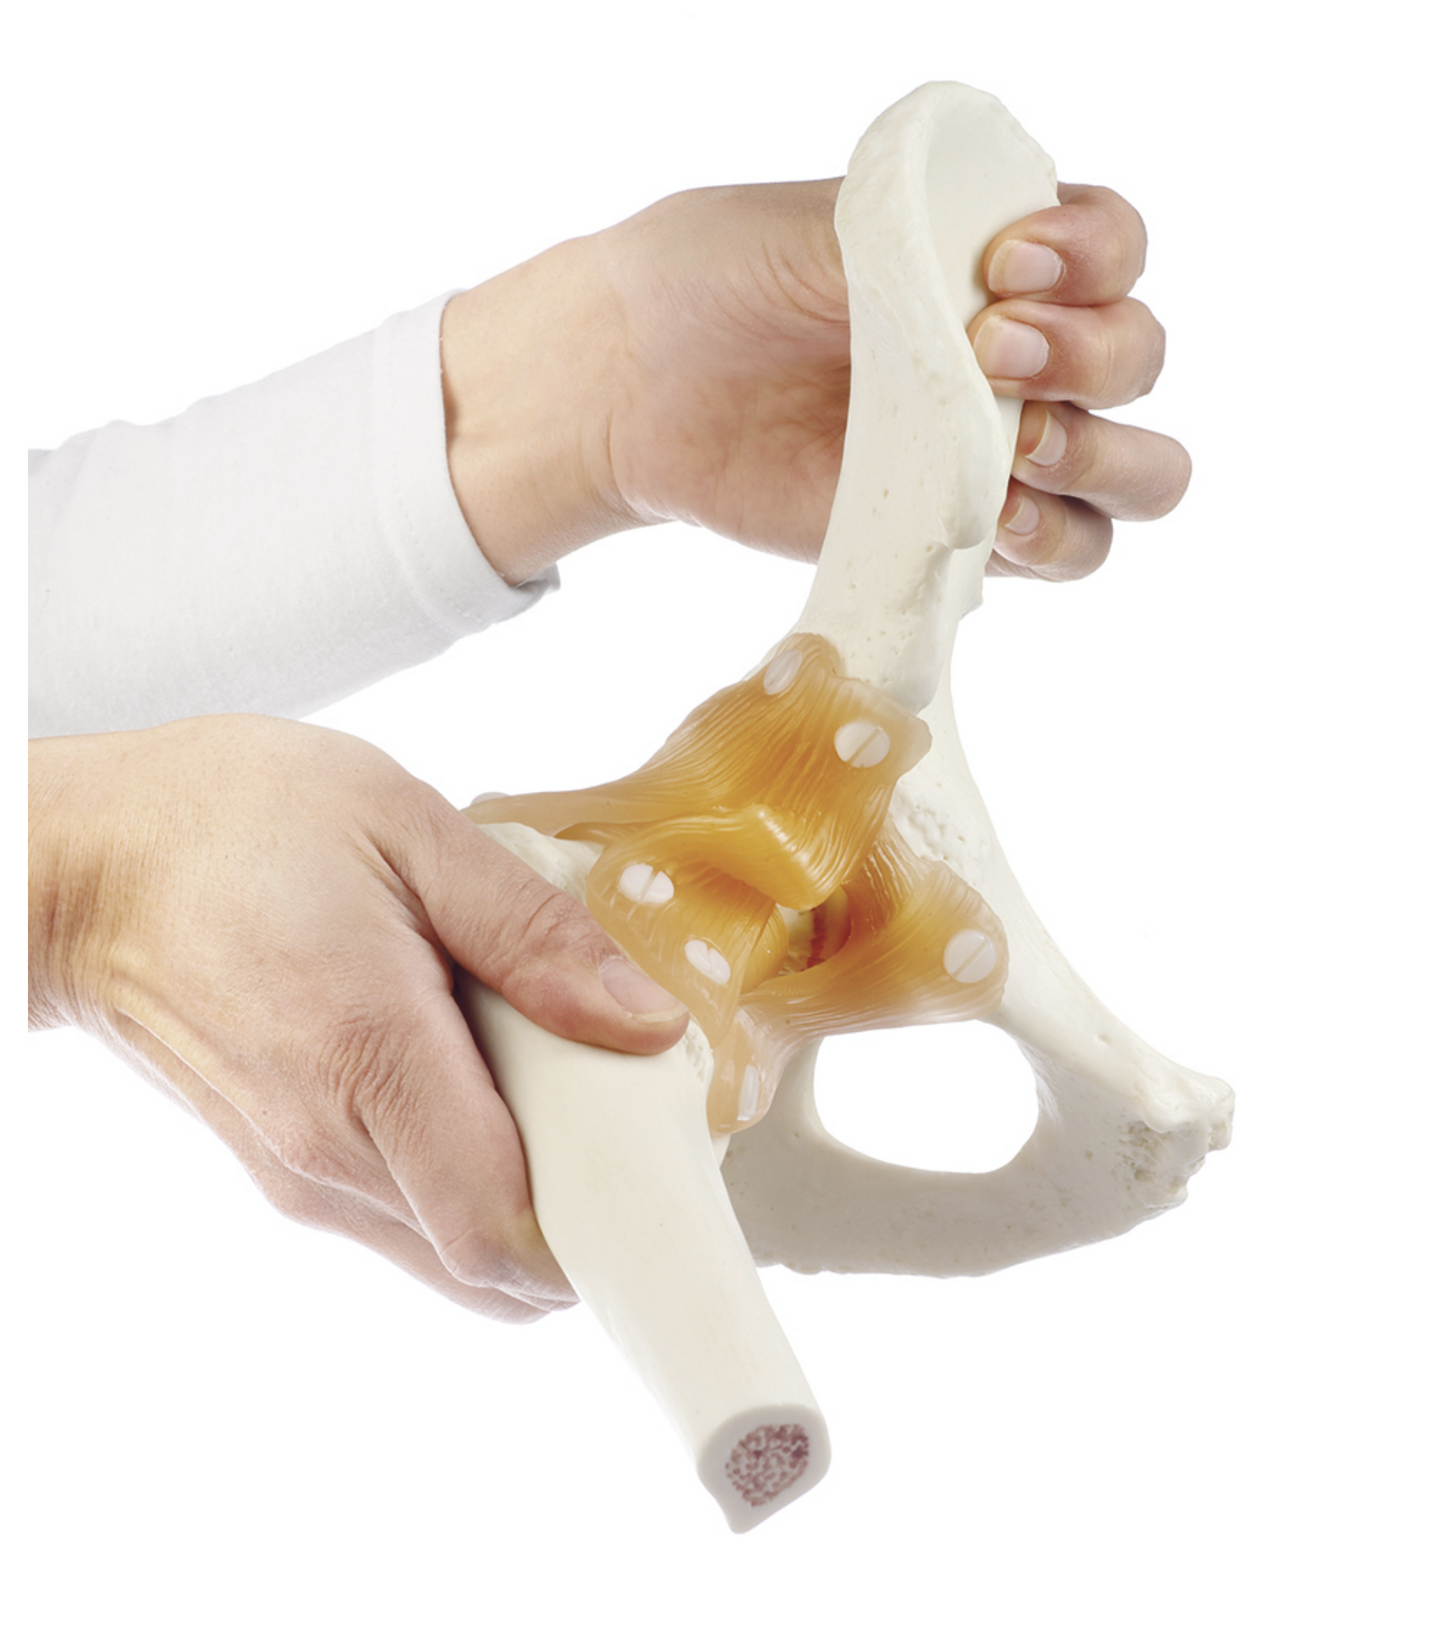 Flexible hip model with ligaments and extremely realistic bone tissue